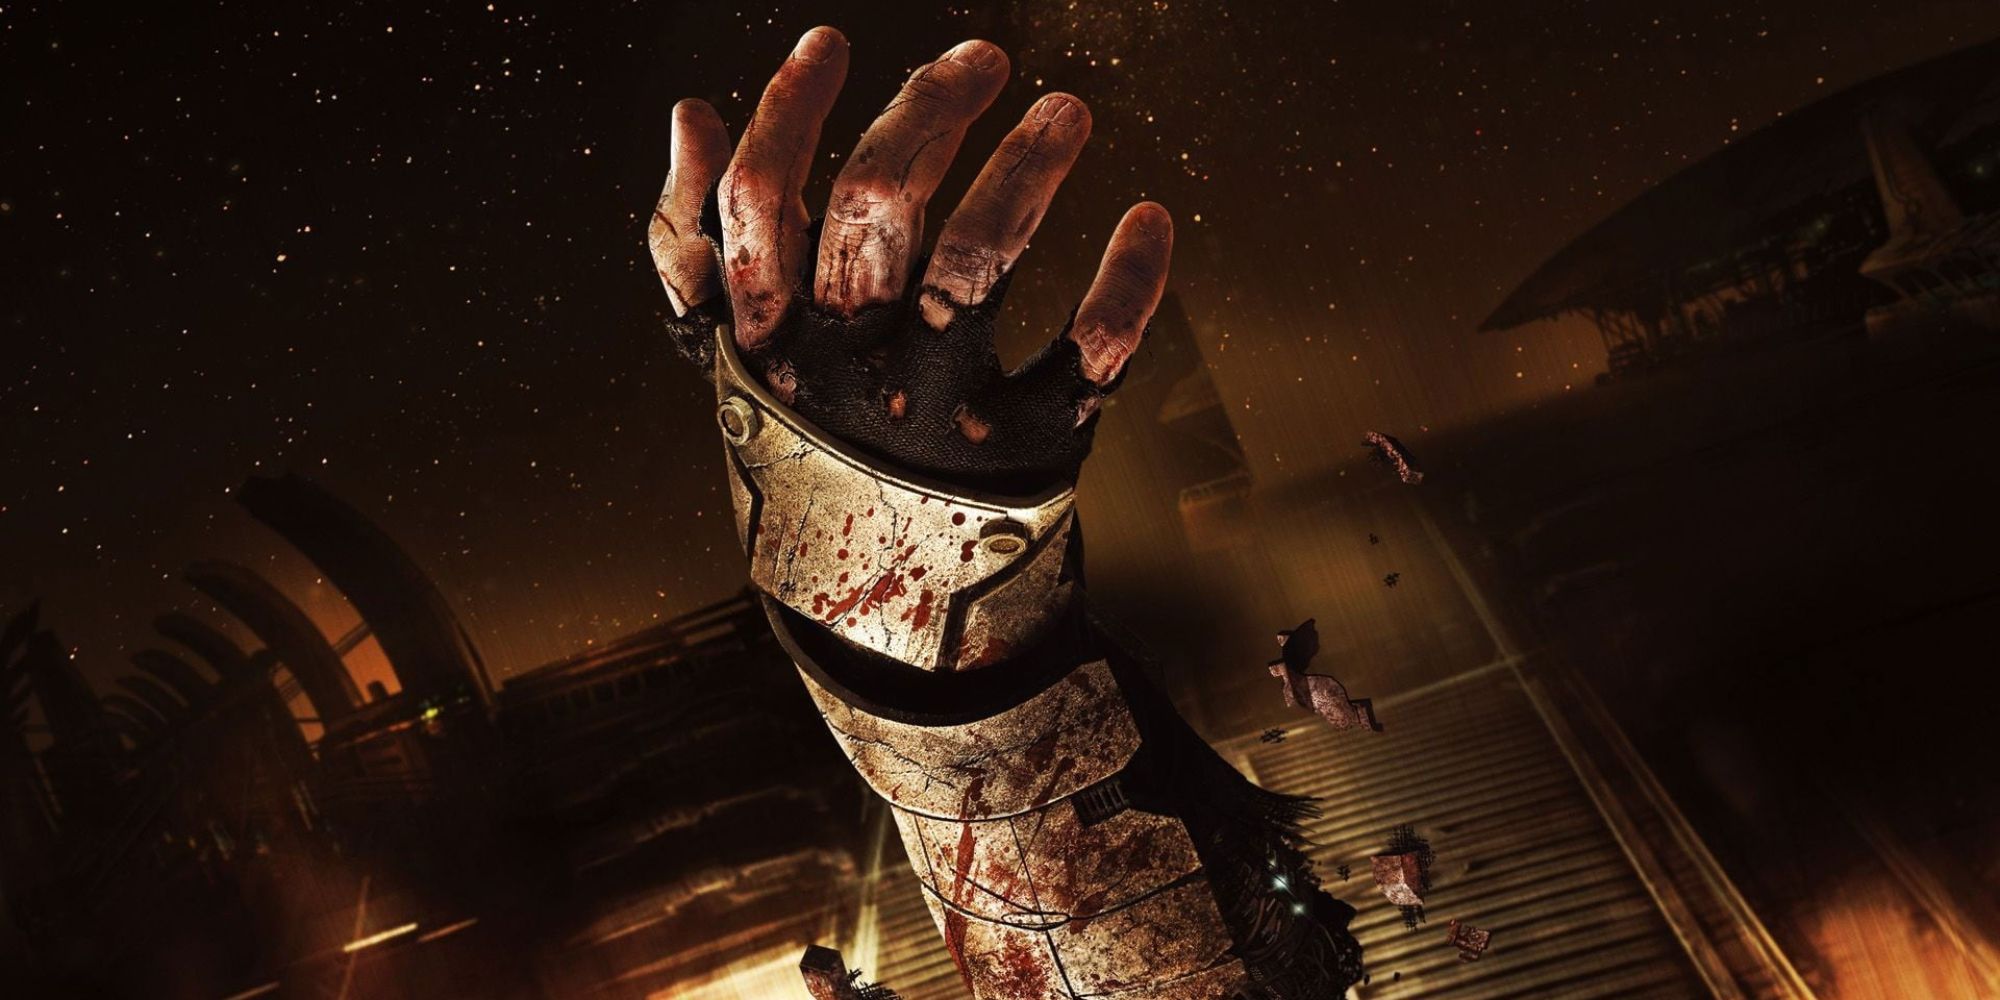 Dead Space's iconic cover art showing a floating hand.